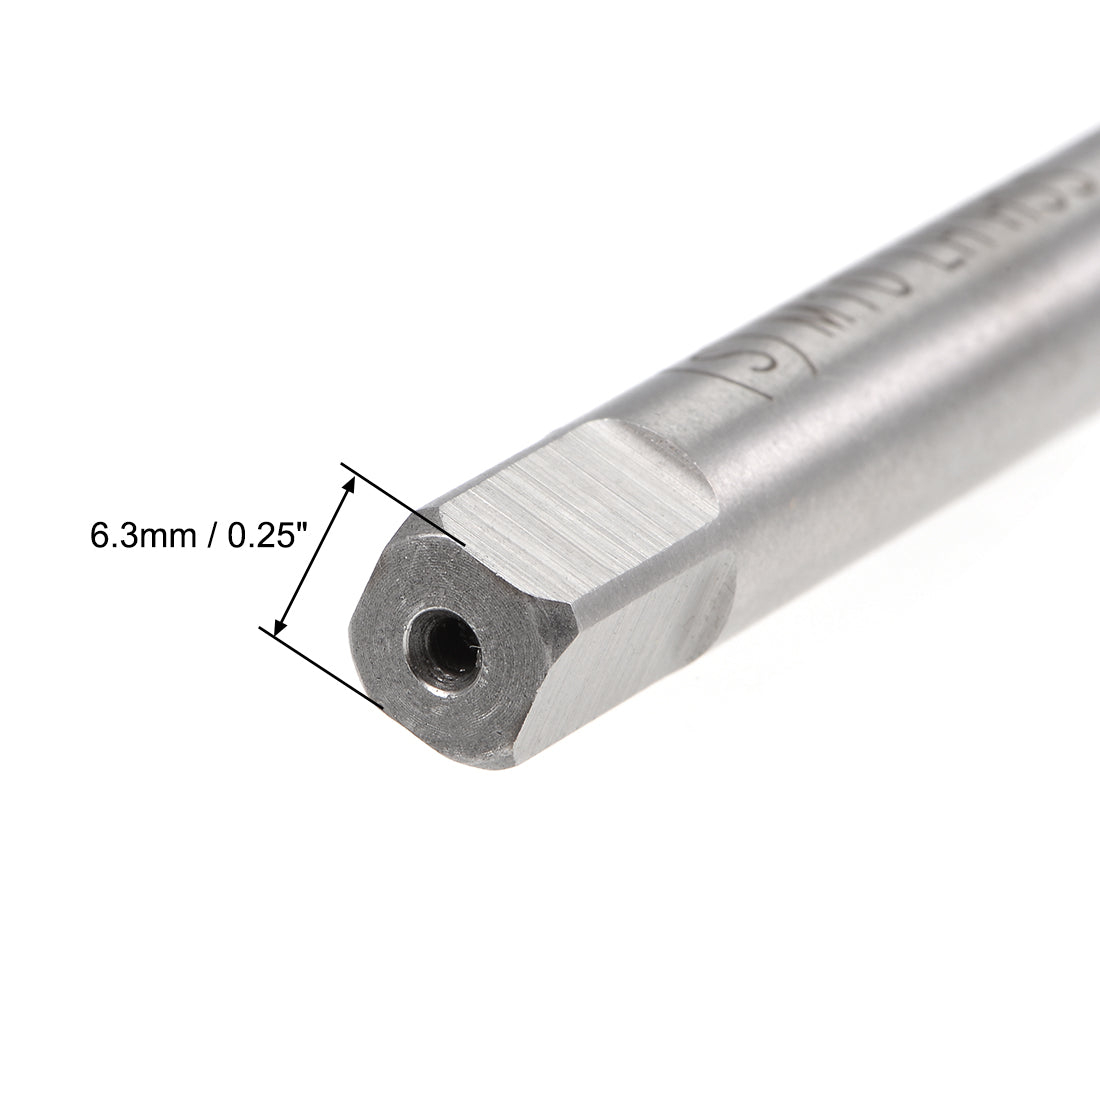 uxcell Uxcell Metric Machine Tap Left M10 Thread 1.5 Pitch H2 3 Flutes High Speed Steel